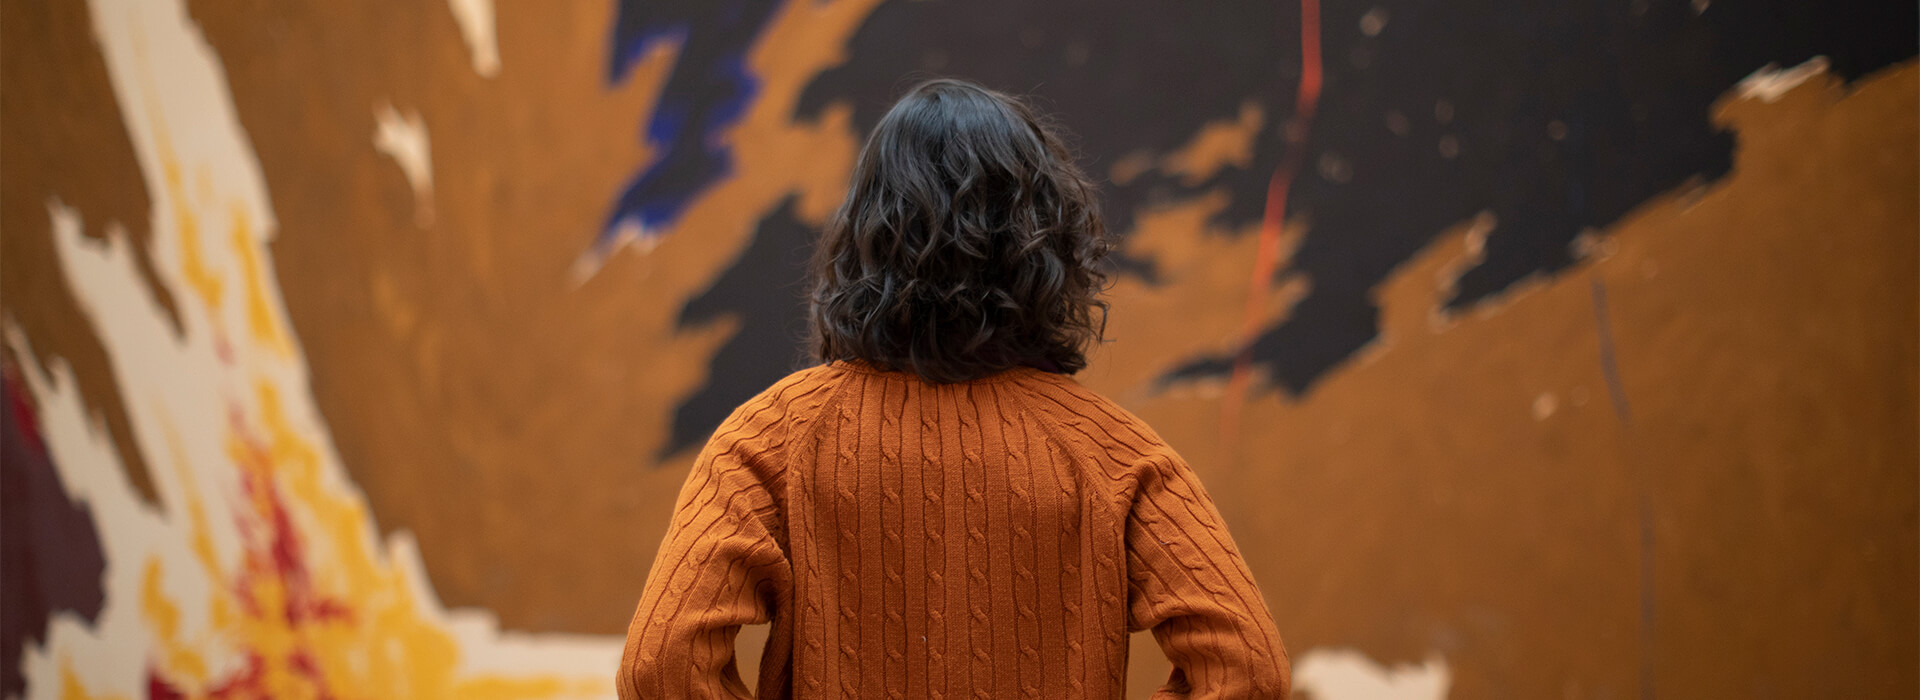 Woman wearing an orange sweater looks up at a large abstract painting with brown, yellow red, blue, black, and orange paint